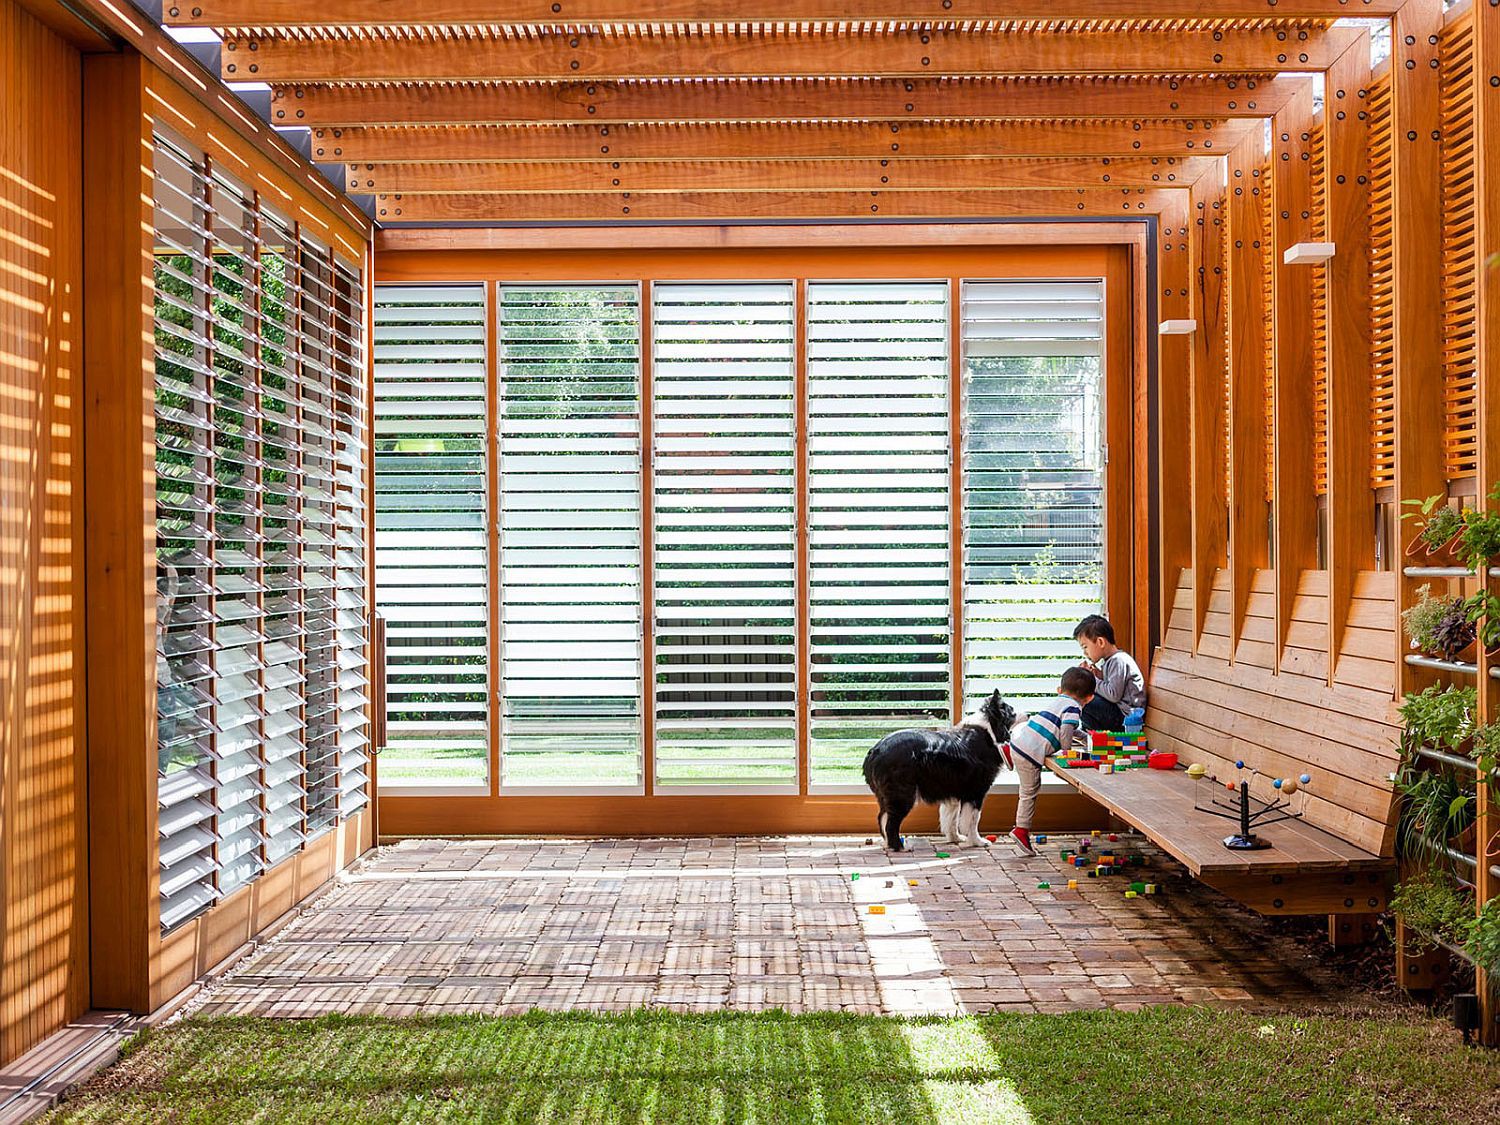 Smart-use-of-translucent-and-normal-glass-sliding-doors-brings-in-plenty-of-natural-light